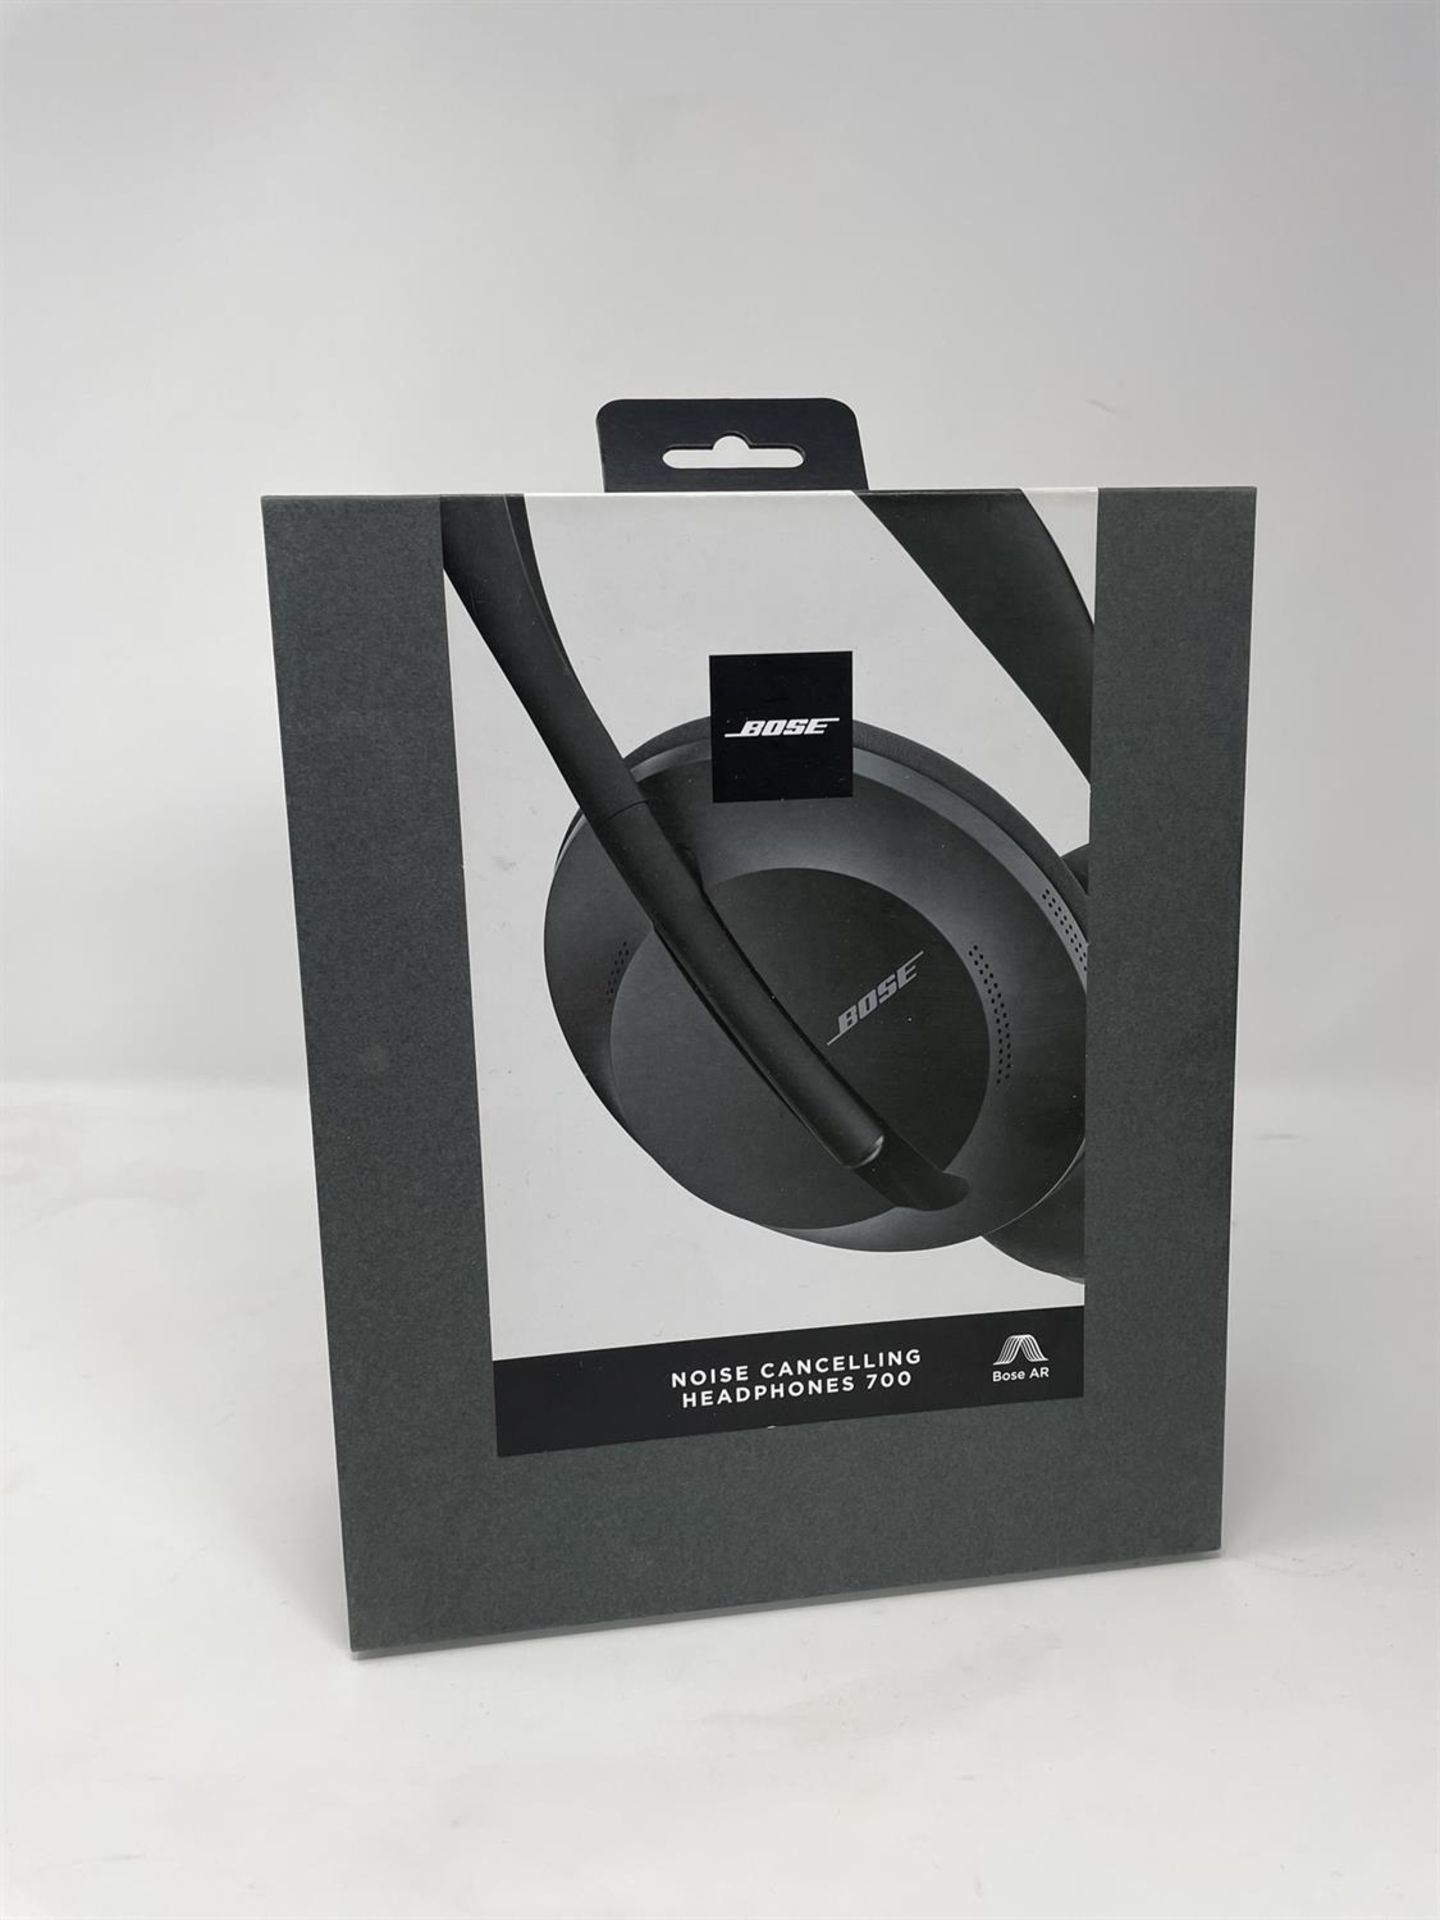 Charity Lot: Lewis Hamilton's Personal Bose 700 Headphones - Image 7 of 10